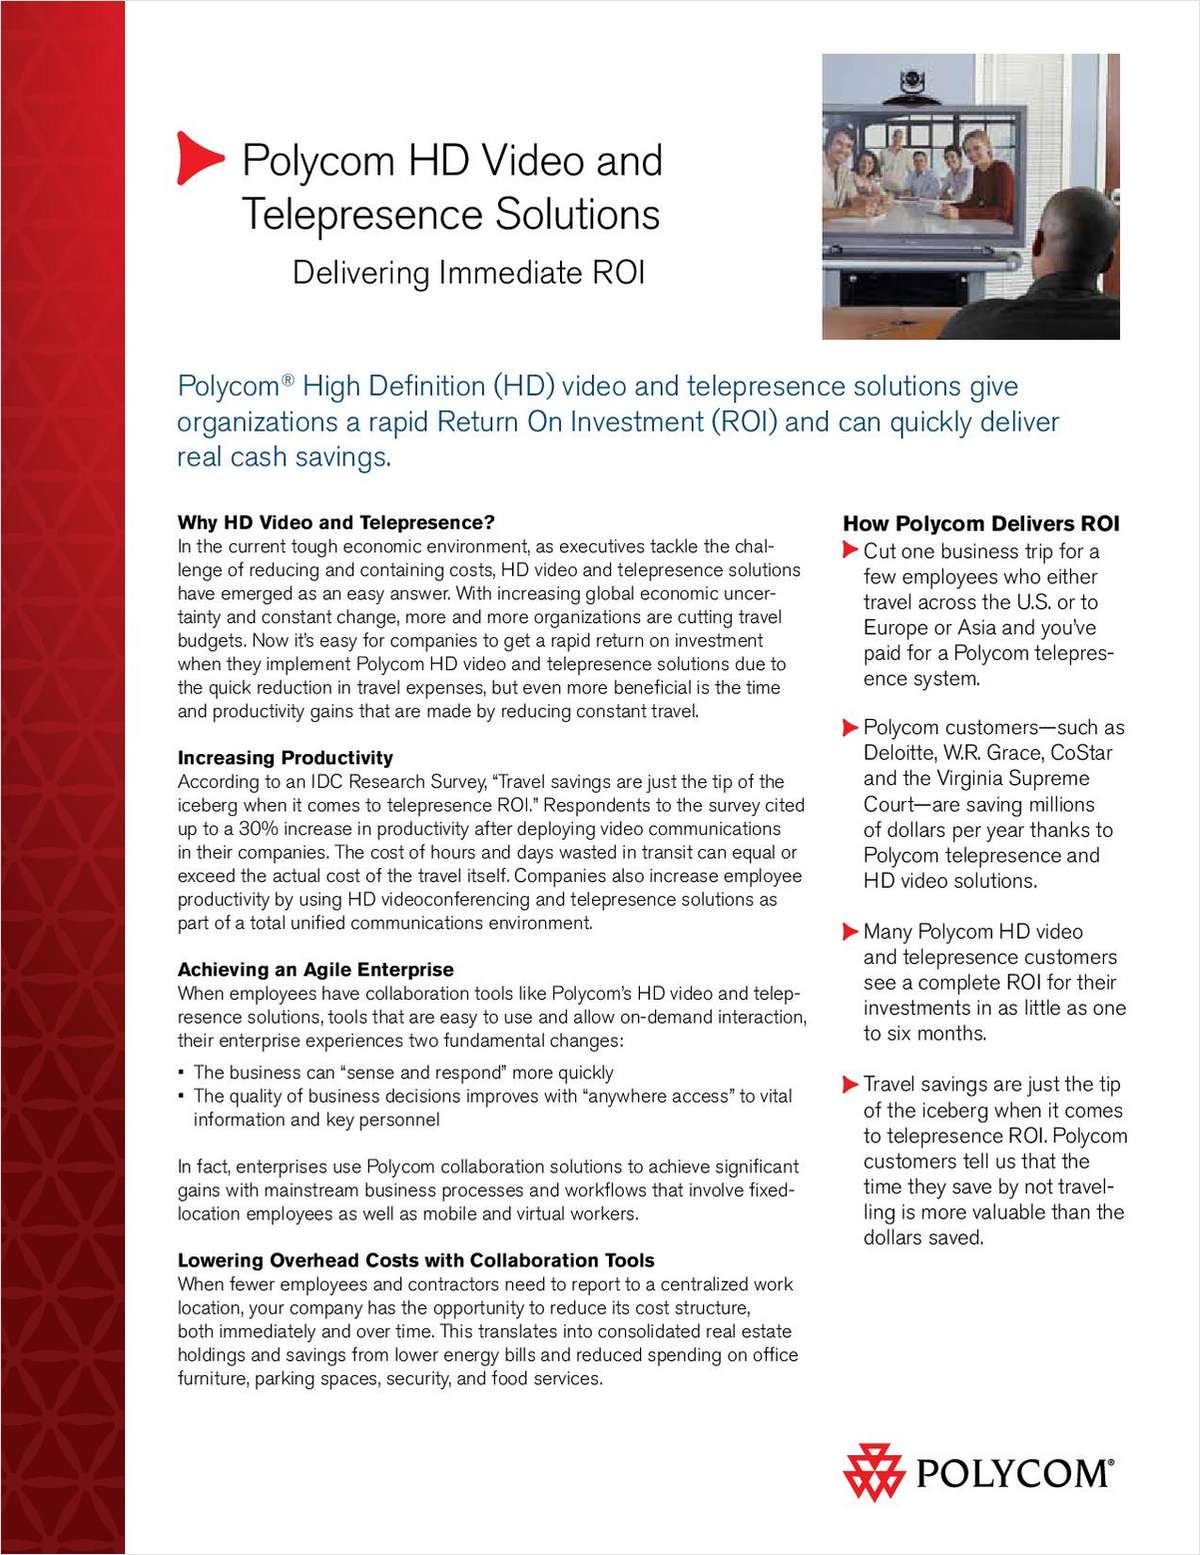 HD Video and Telepresence Solutions: Delivering Immediate ROI